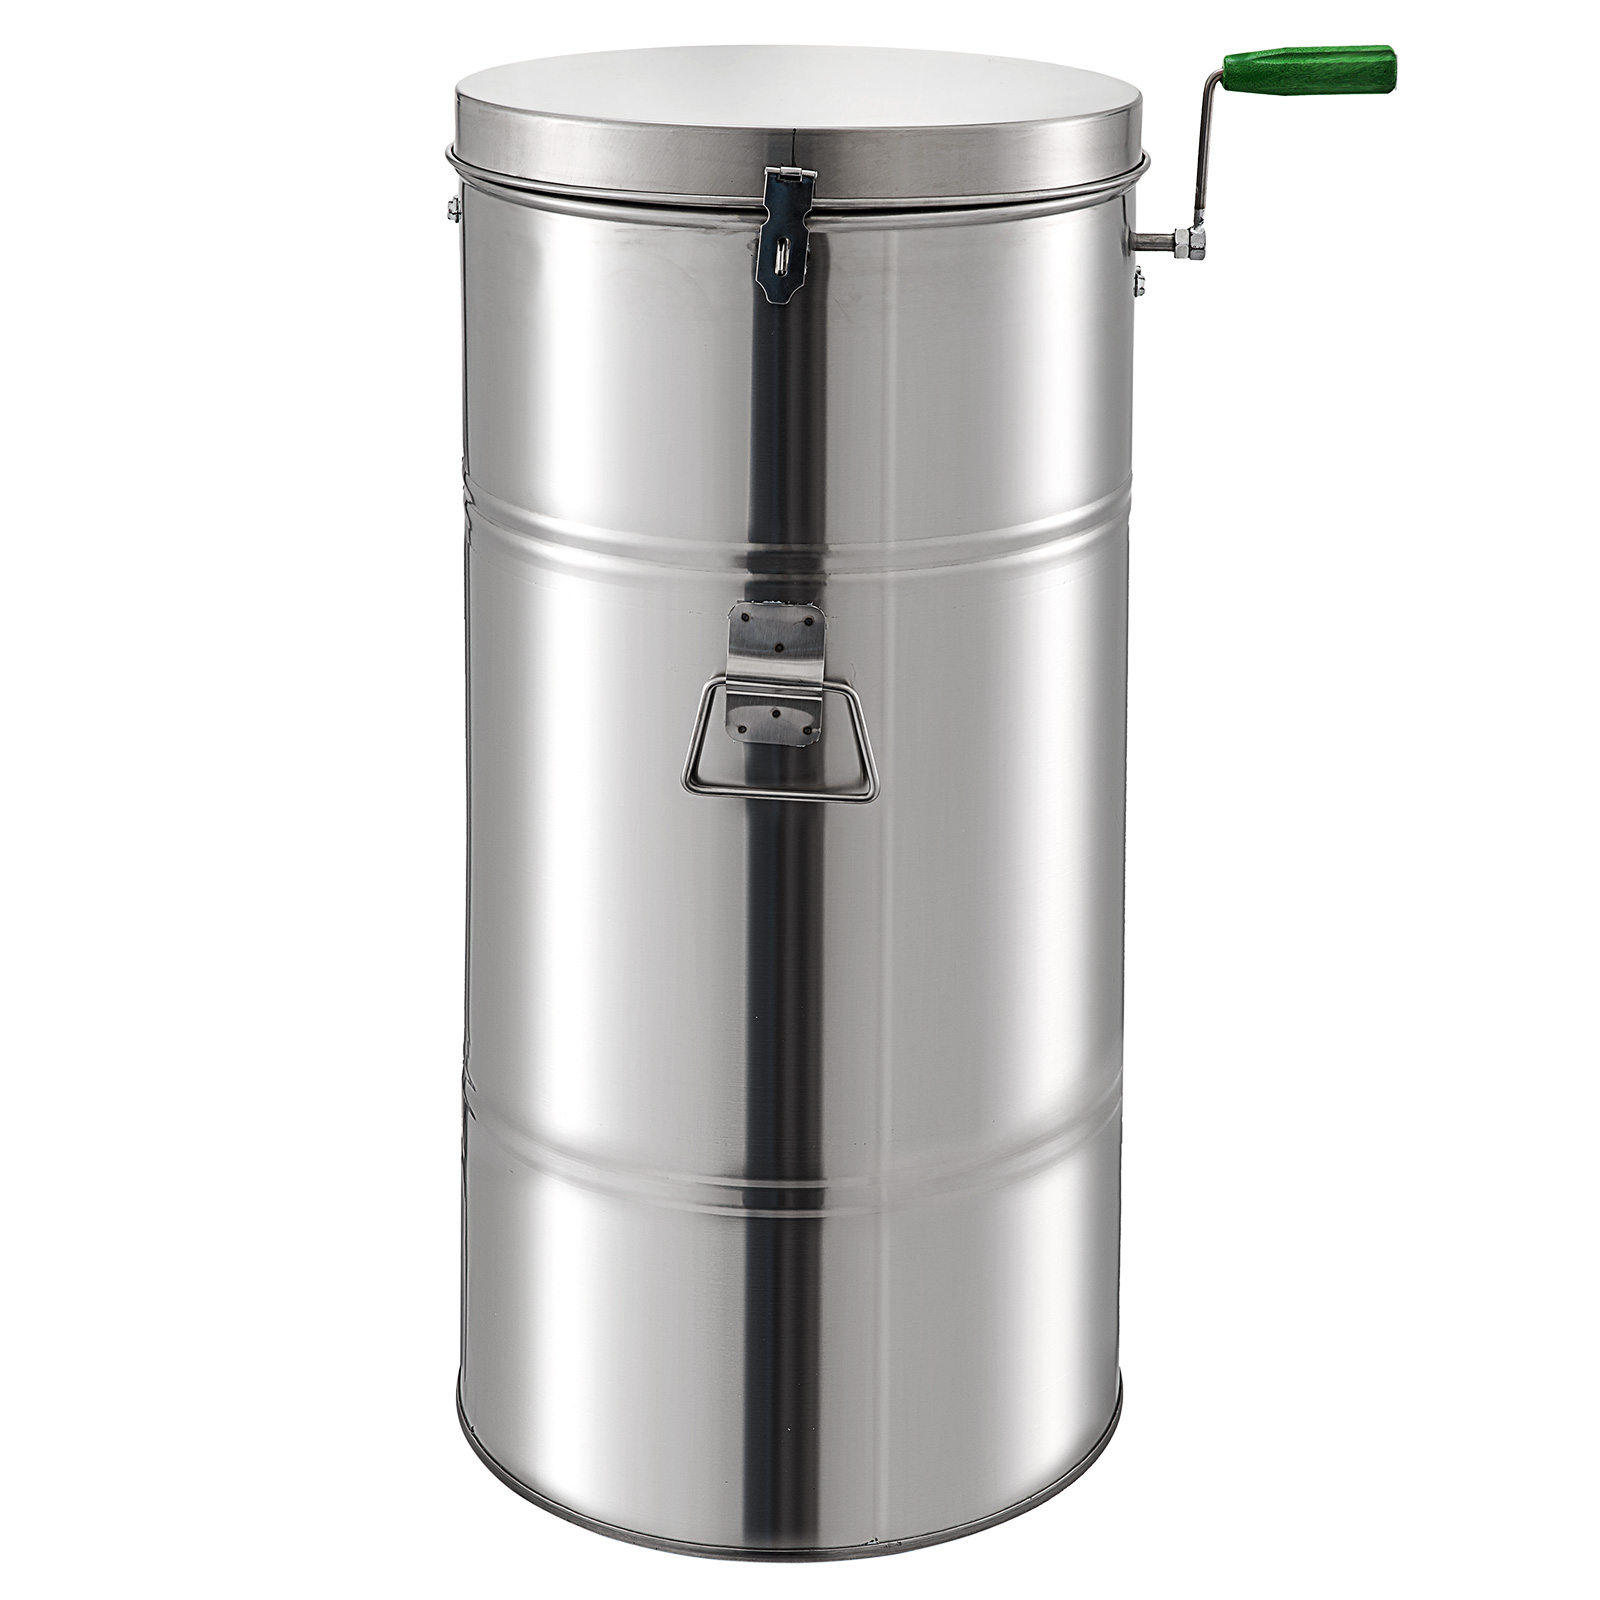 4 Frame, Stainless Steel, Manual Honey  Extractor